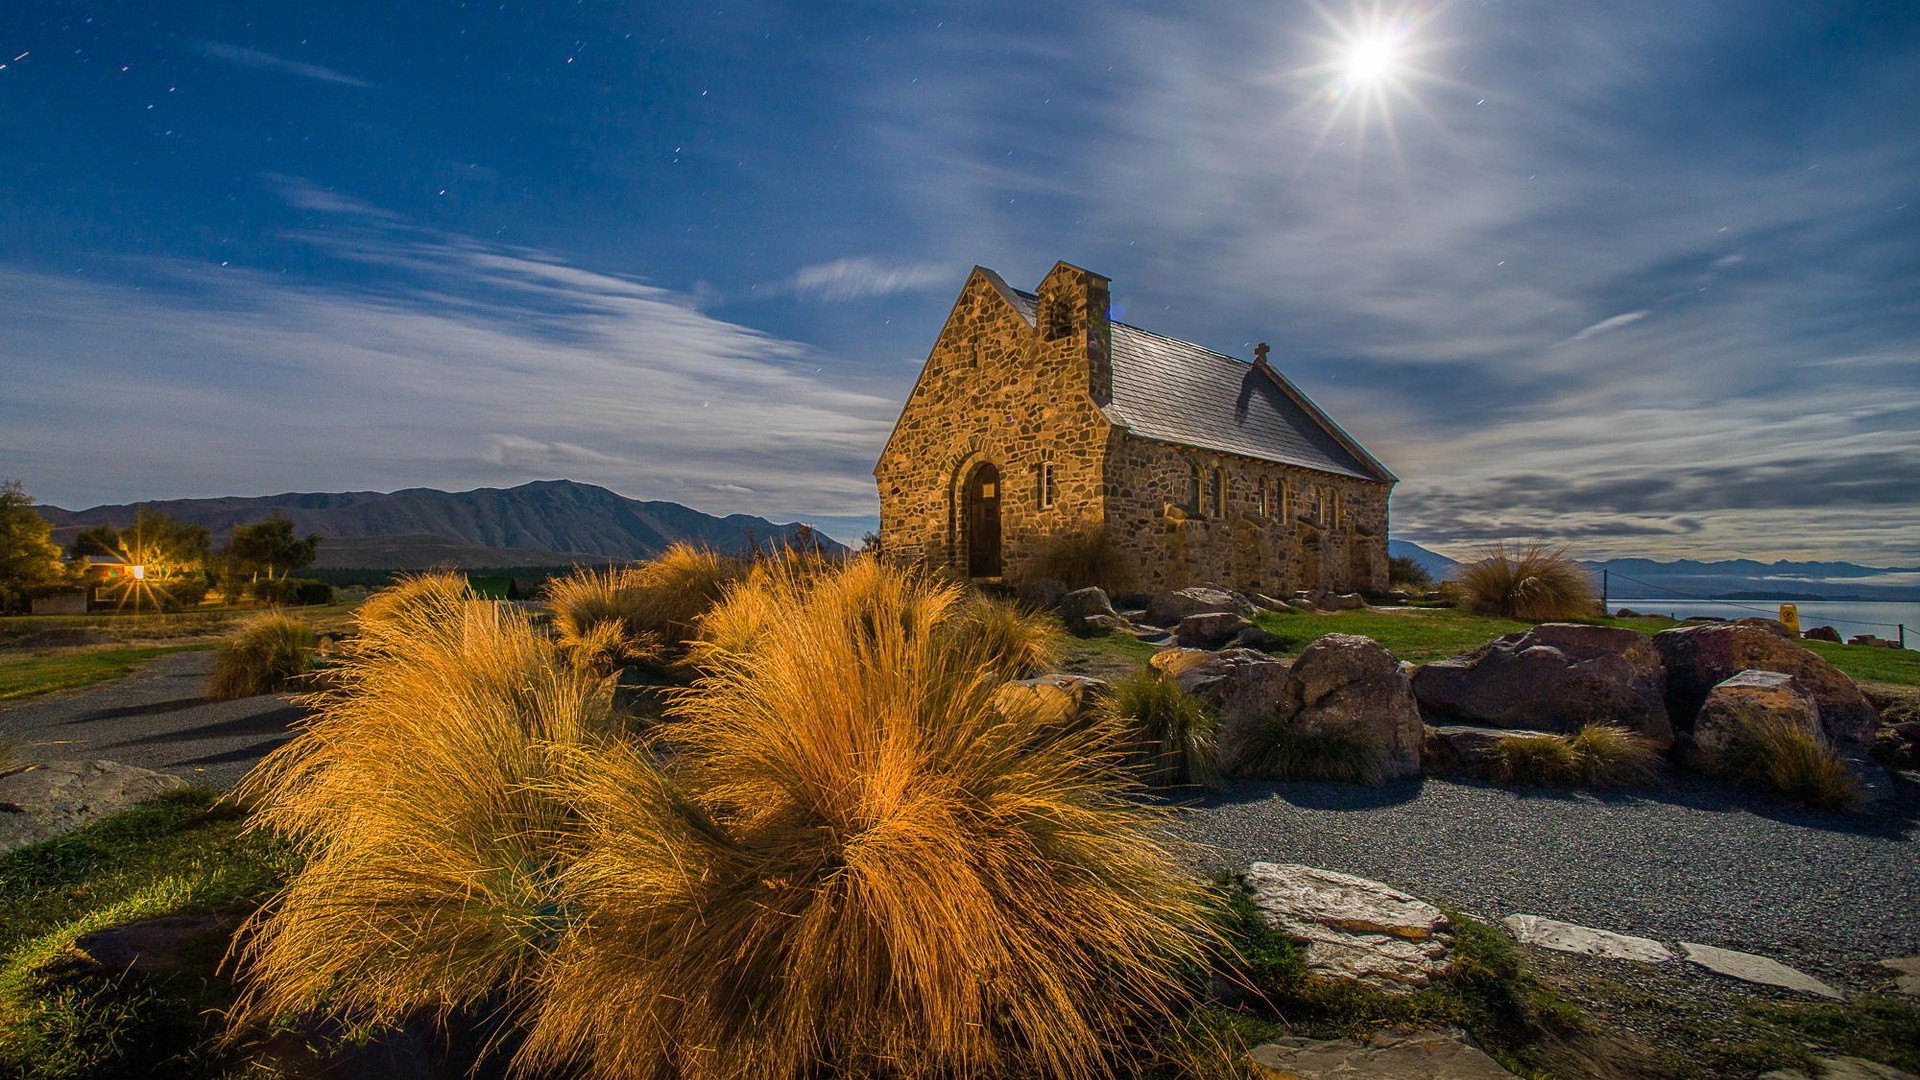 nature, Landscape, Architecture, Old Building, House, Hill, Stones, Rock, Plants, Night, Moon Rays, Clouds, Stars, Path, Mountain, Shadow, Long Exposure Wallpaper